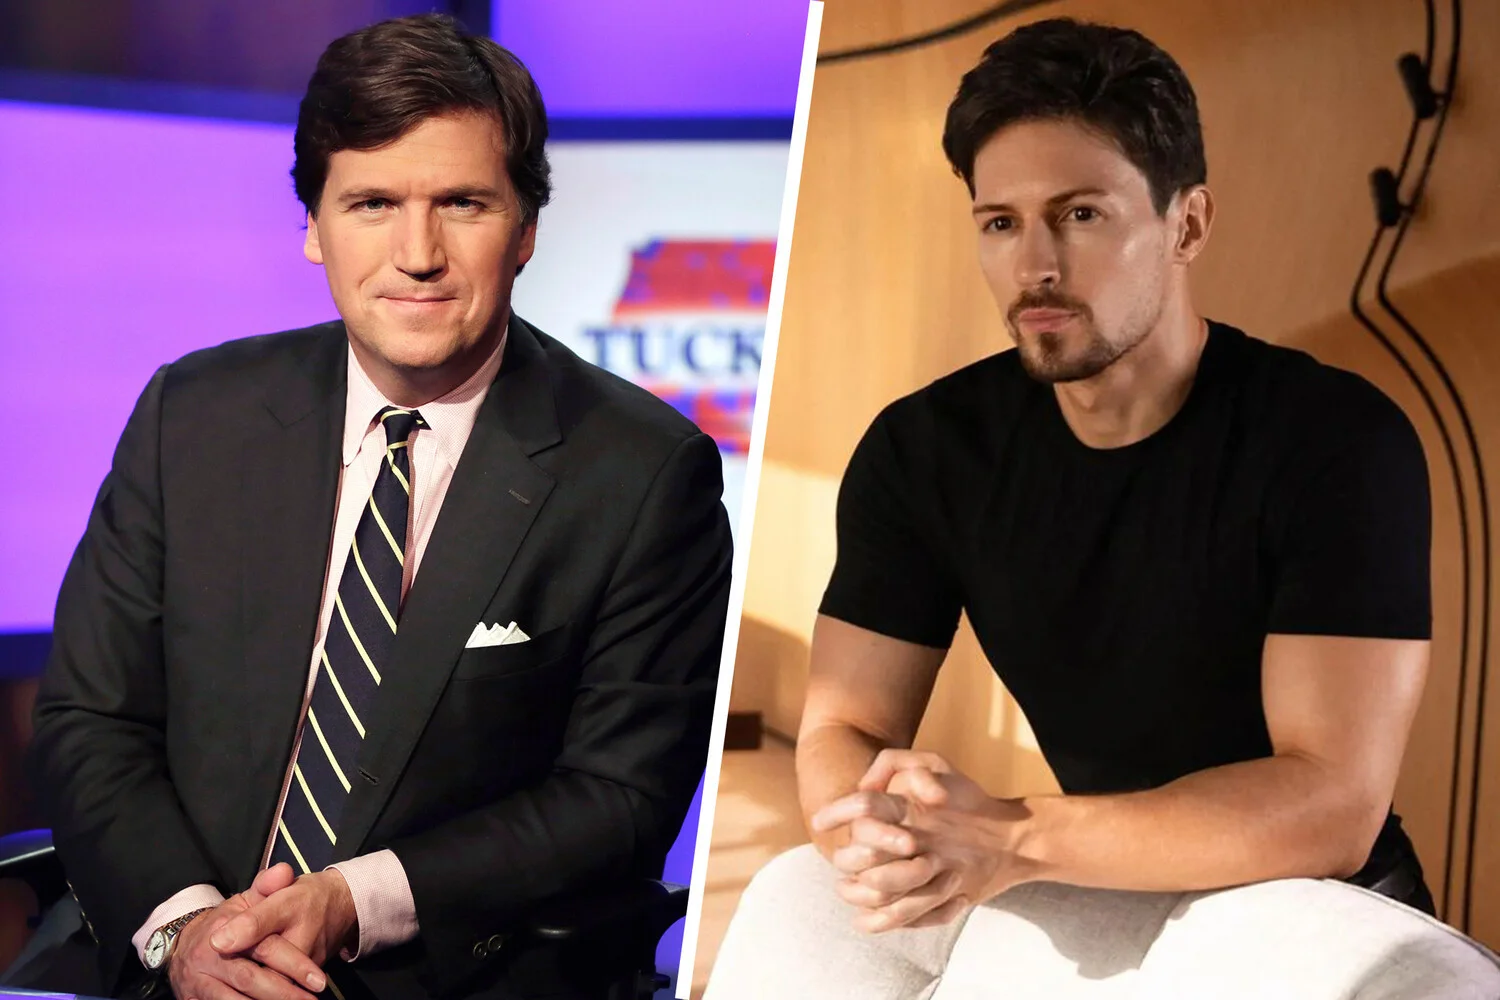 Pavel Durov gave an interview to Tucker Carlson